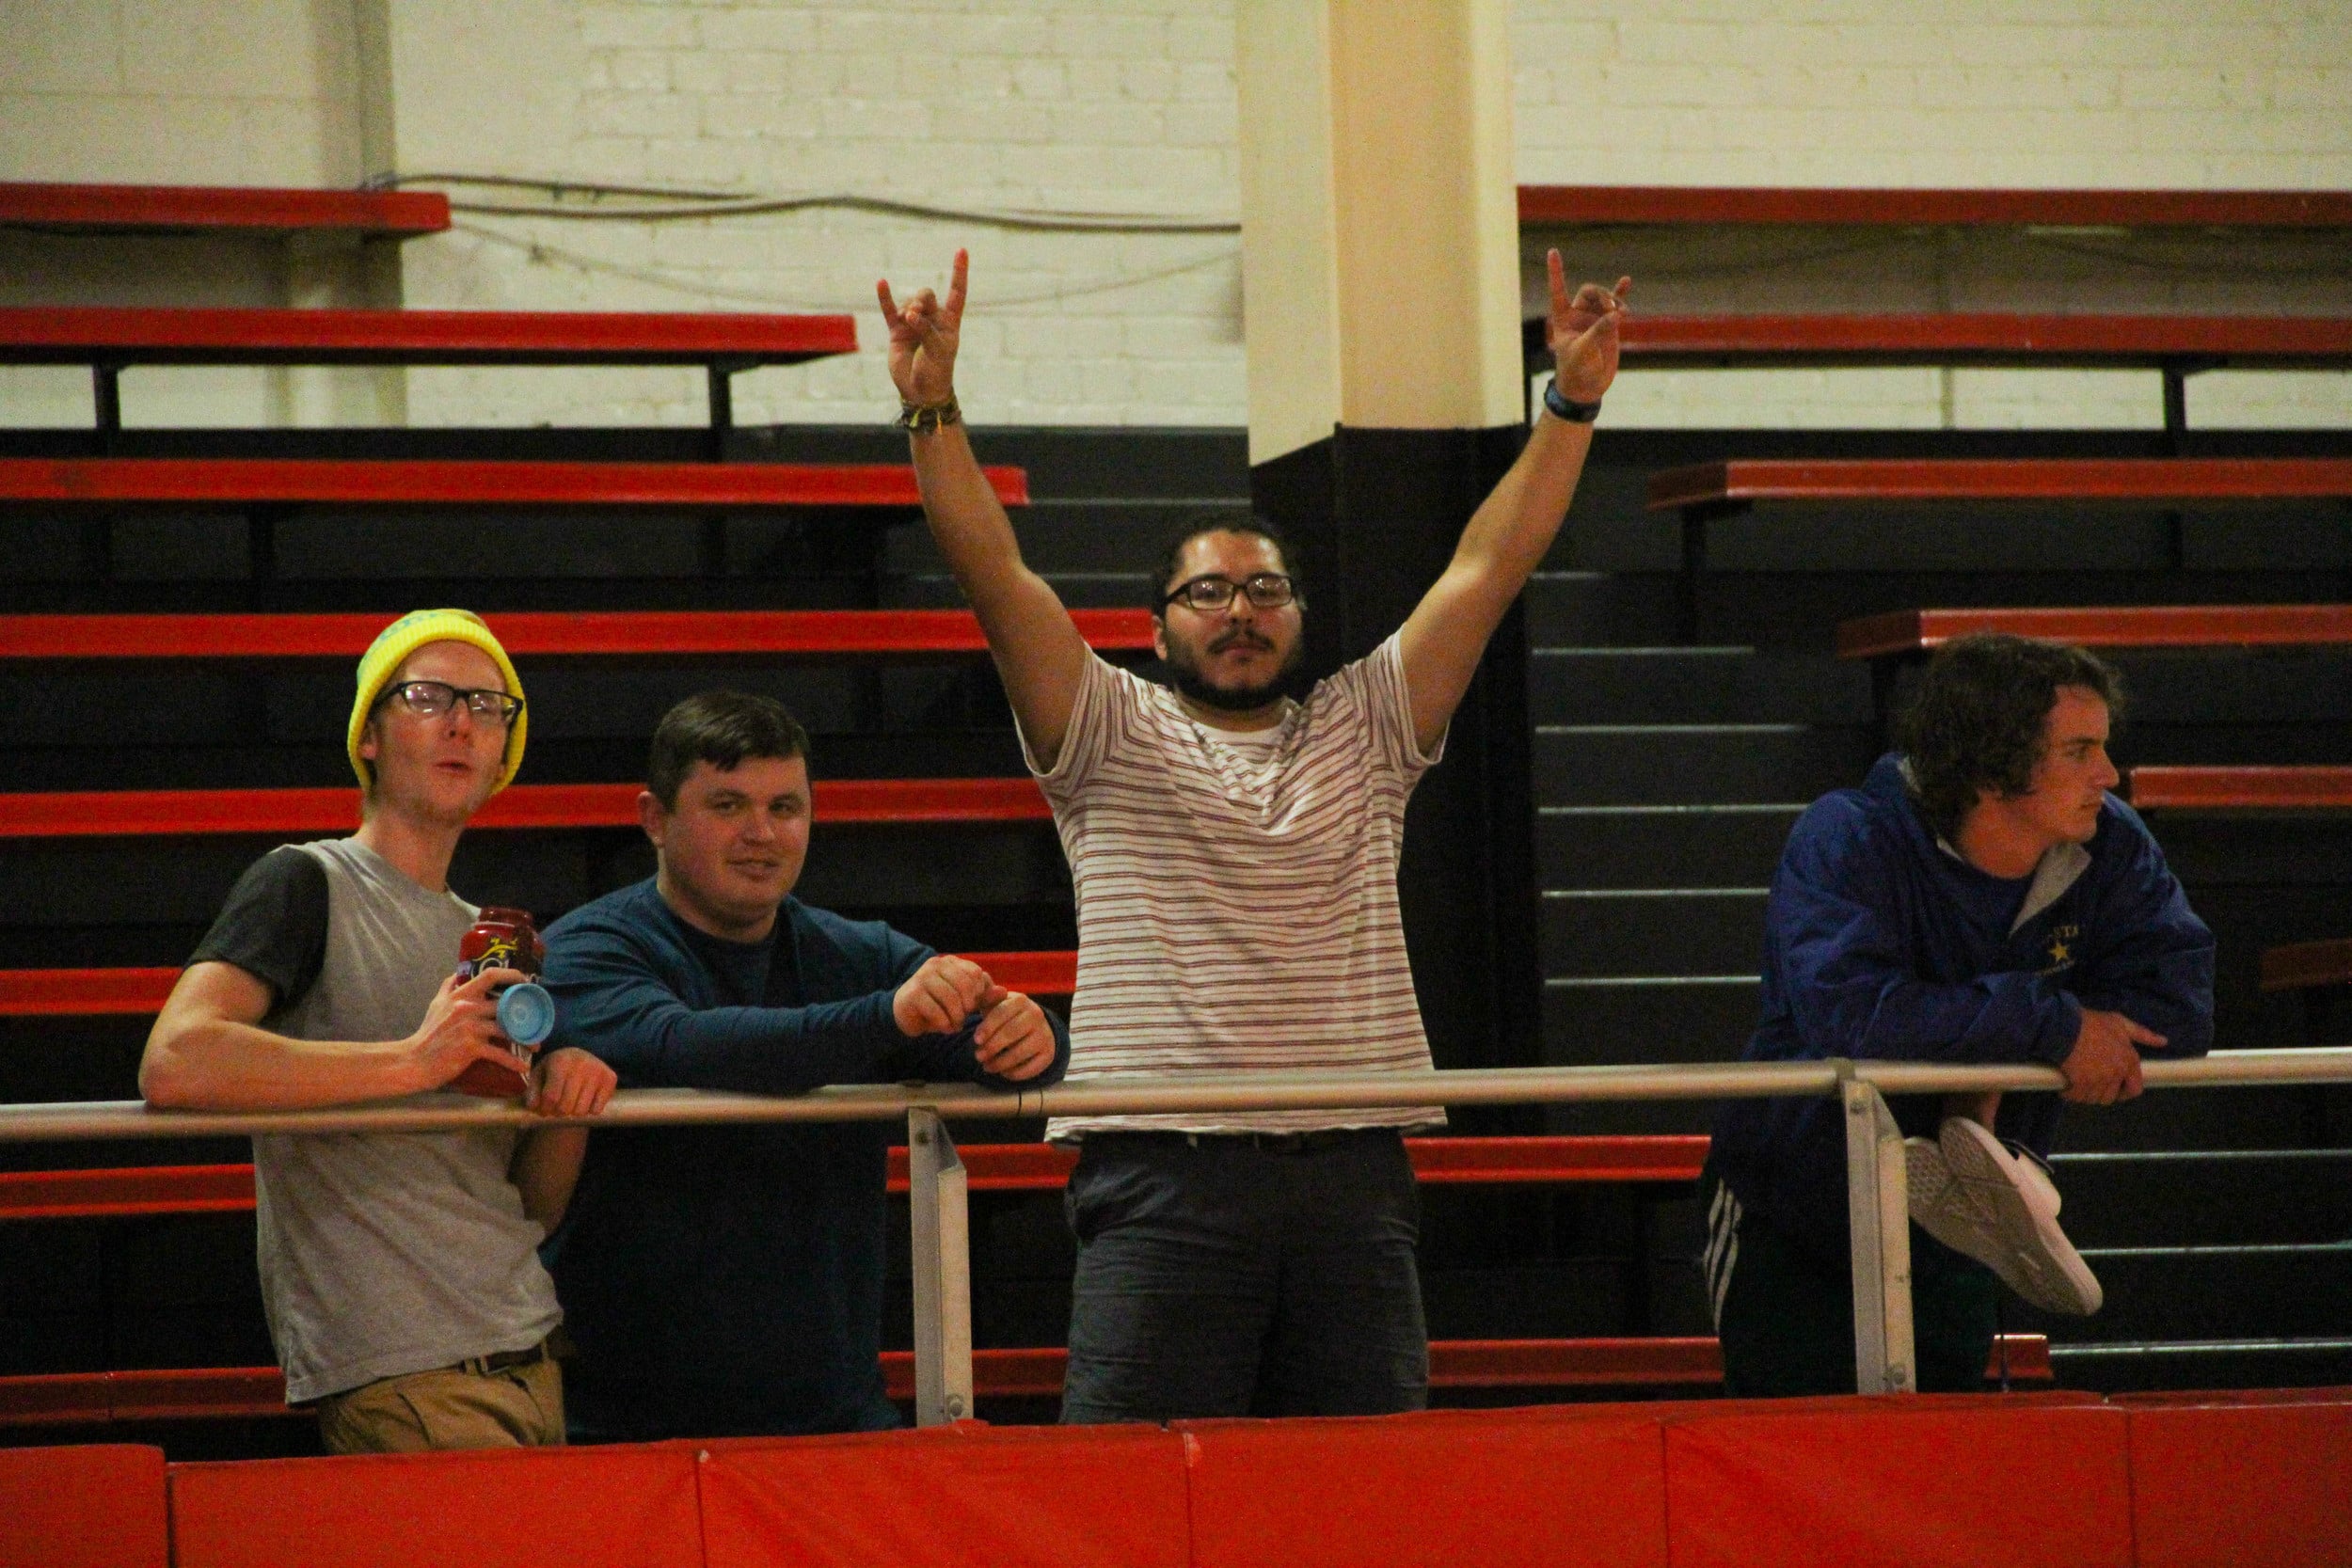  Rico Areiza, John Luke Griffith, and other students cheer for the players. 